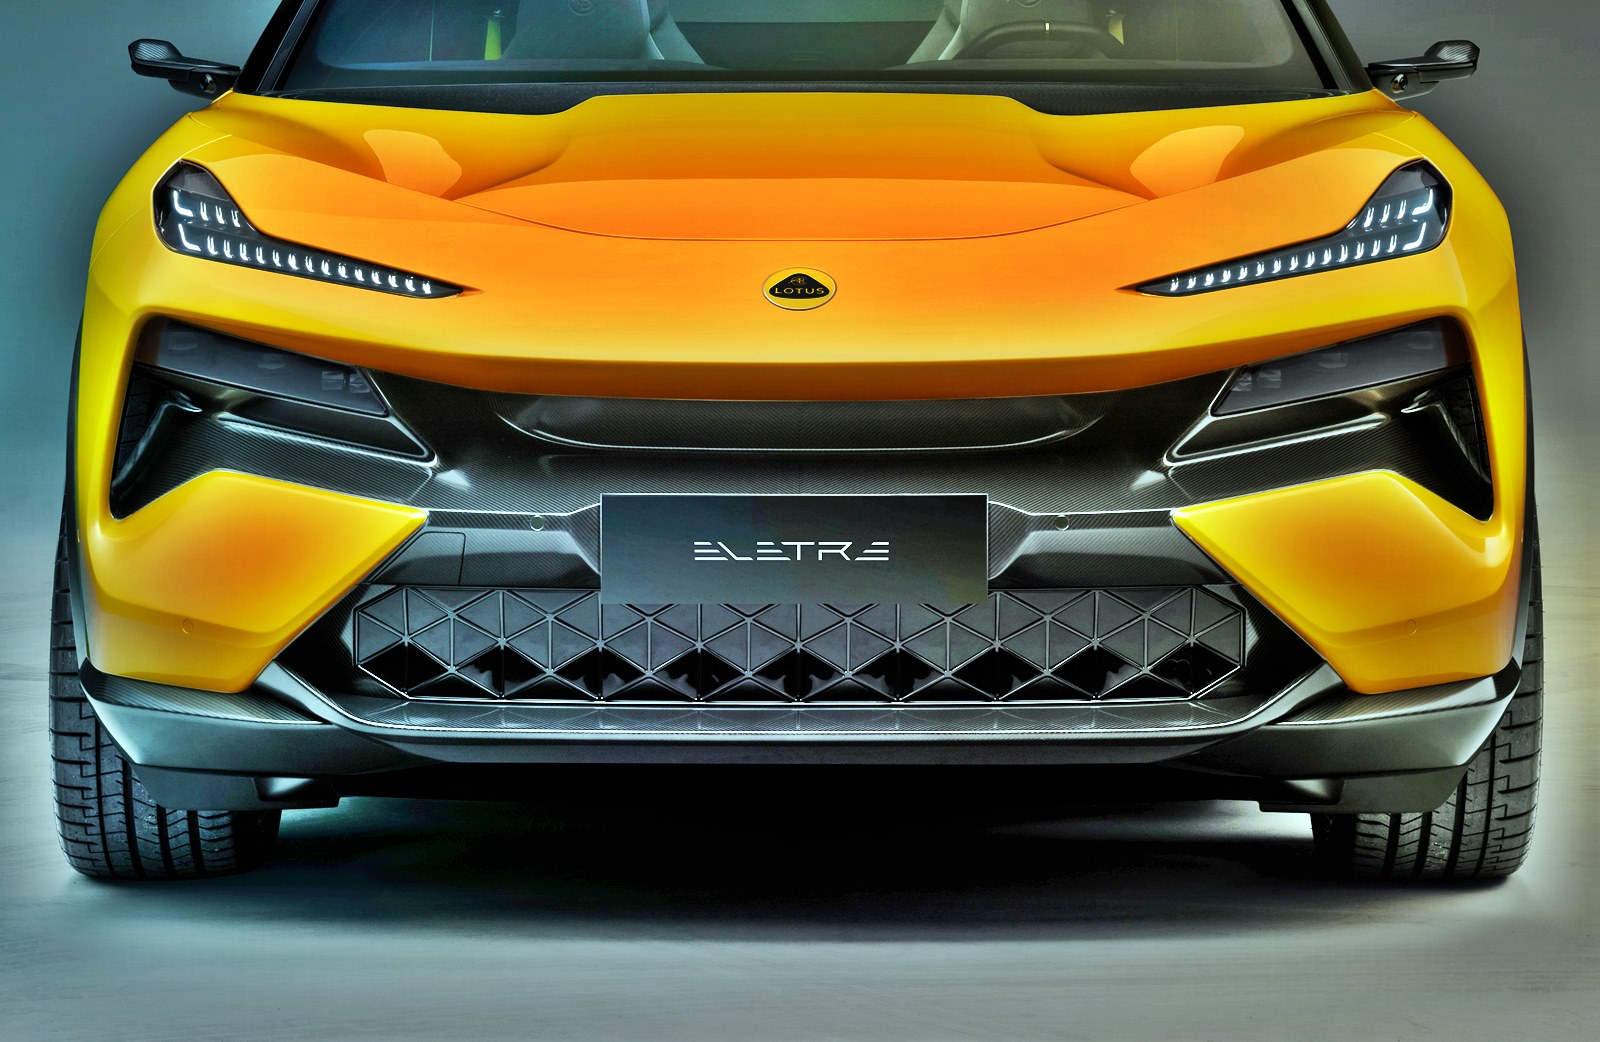 lotus eletre hyper suv debuts in malaysia, priced from rm578,000